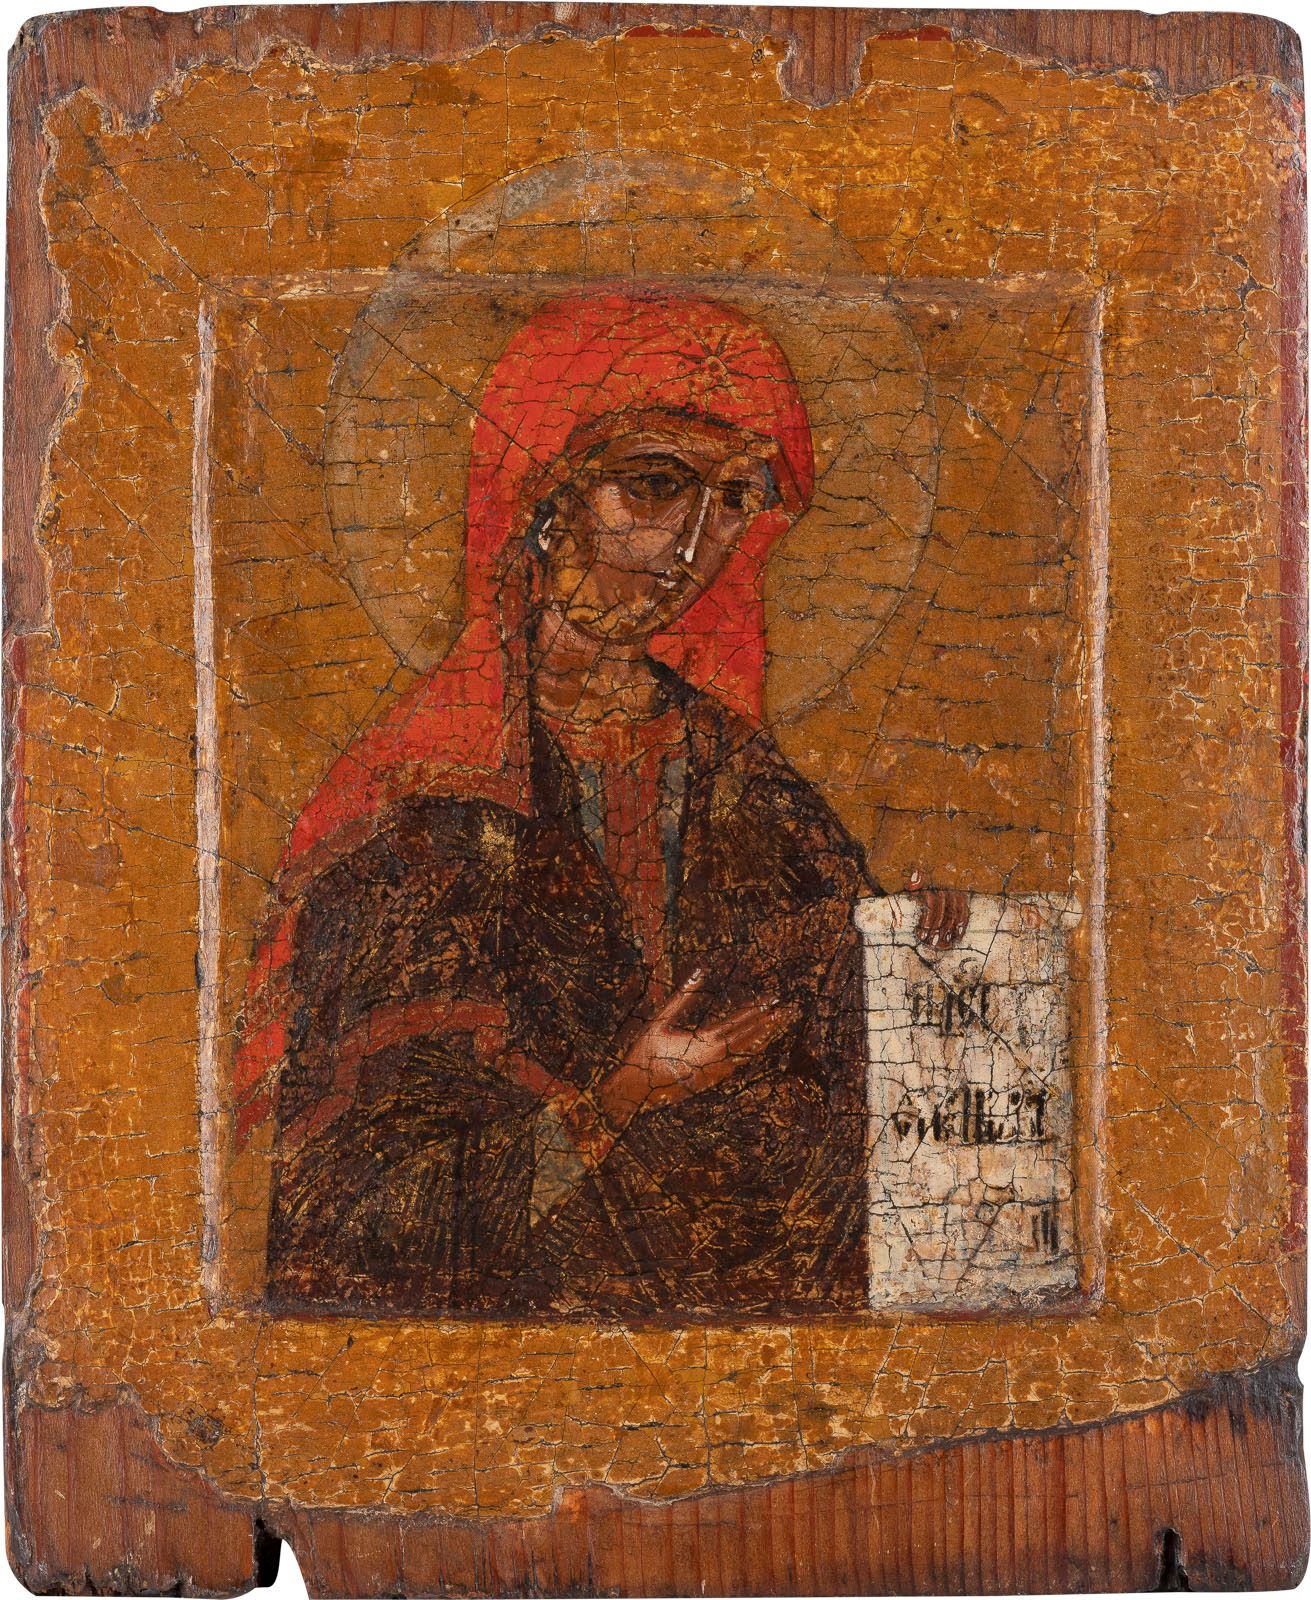 A SMALL ICON SHOWING THE MOTHER OF GOD FROM A DEISIS PICCOLA ICONA CHE MOSTRA LA&hellip;